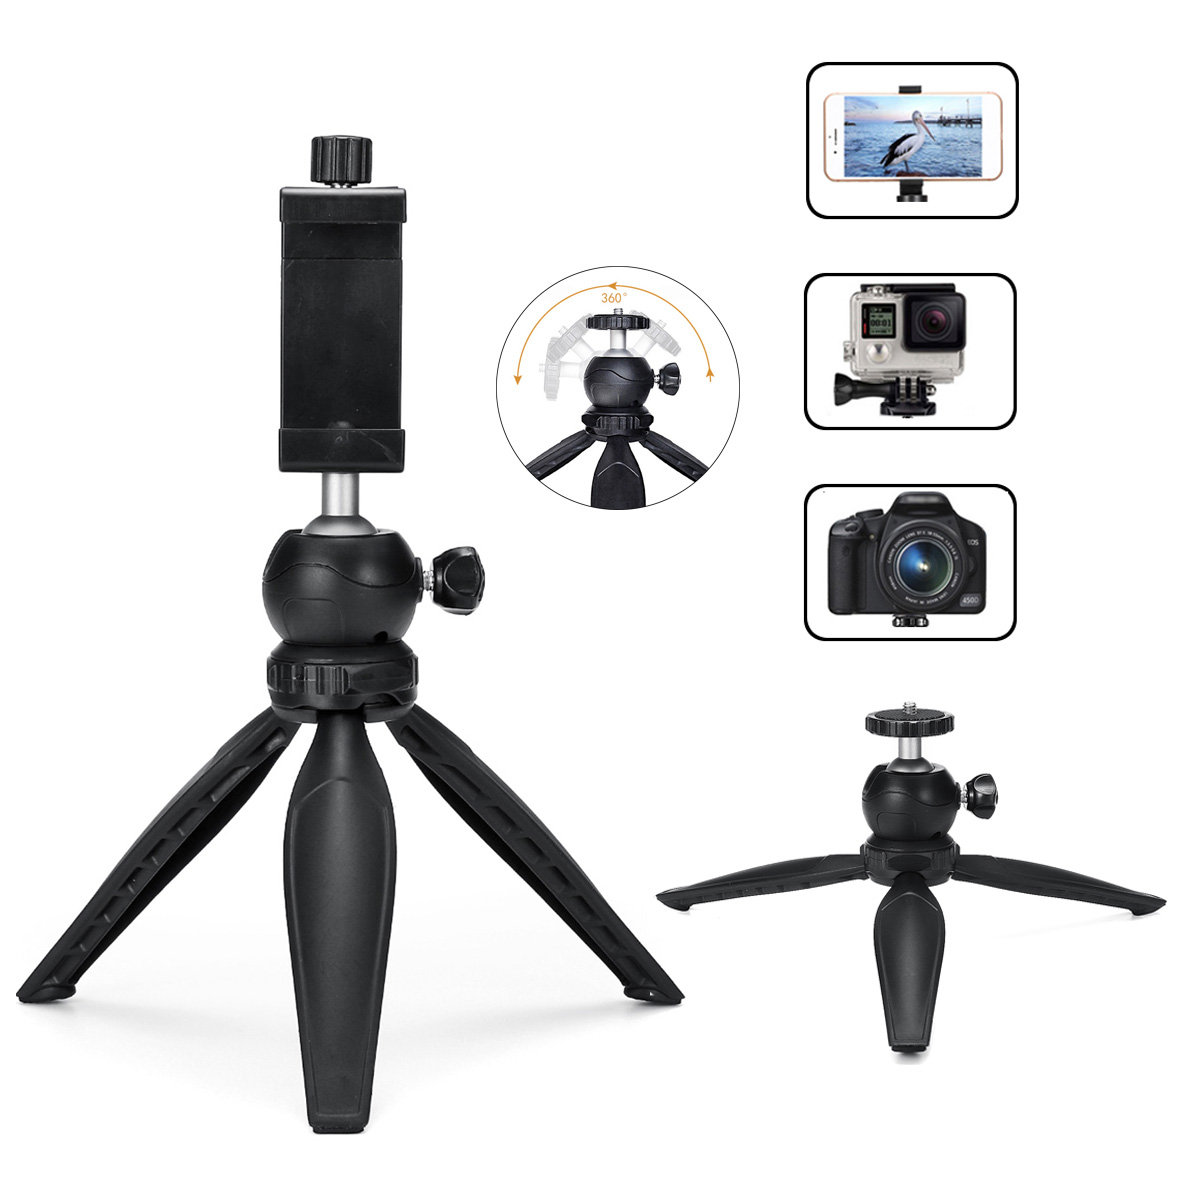 

Mini Multi-angle Rotation Handheld Selfie Stick Tripod for Sports Camera Tabletop Smartphones With Phone Clip